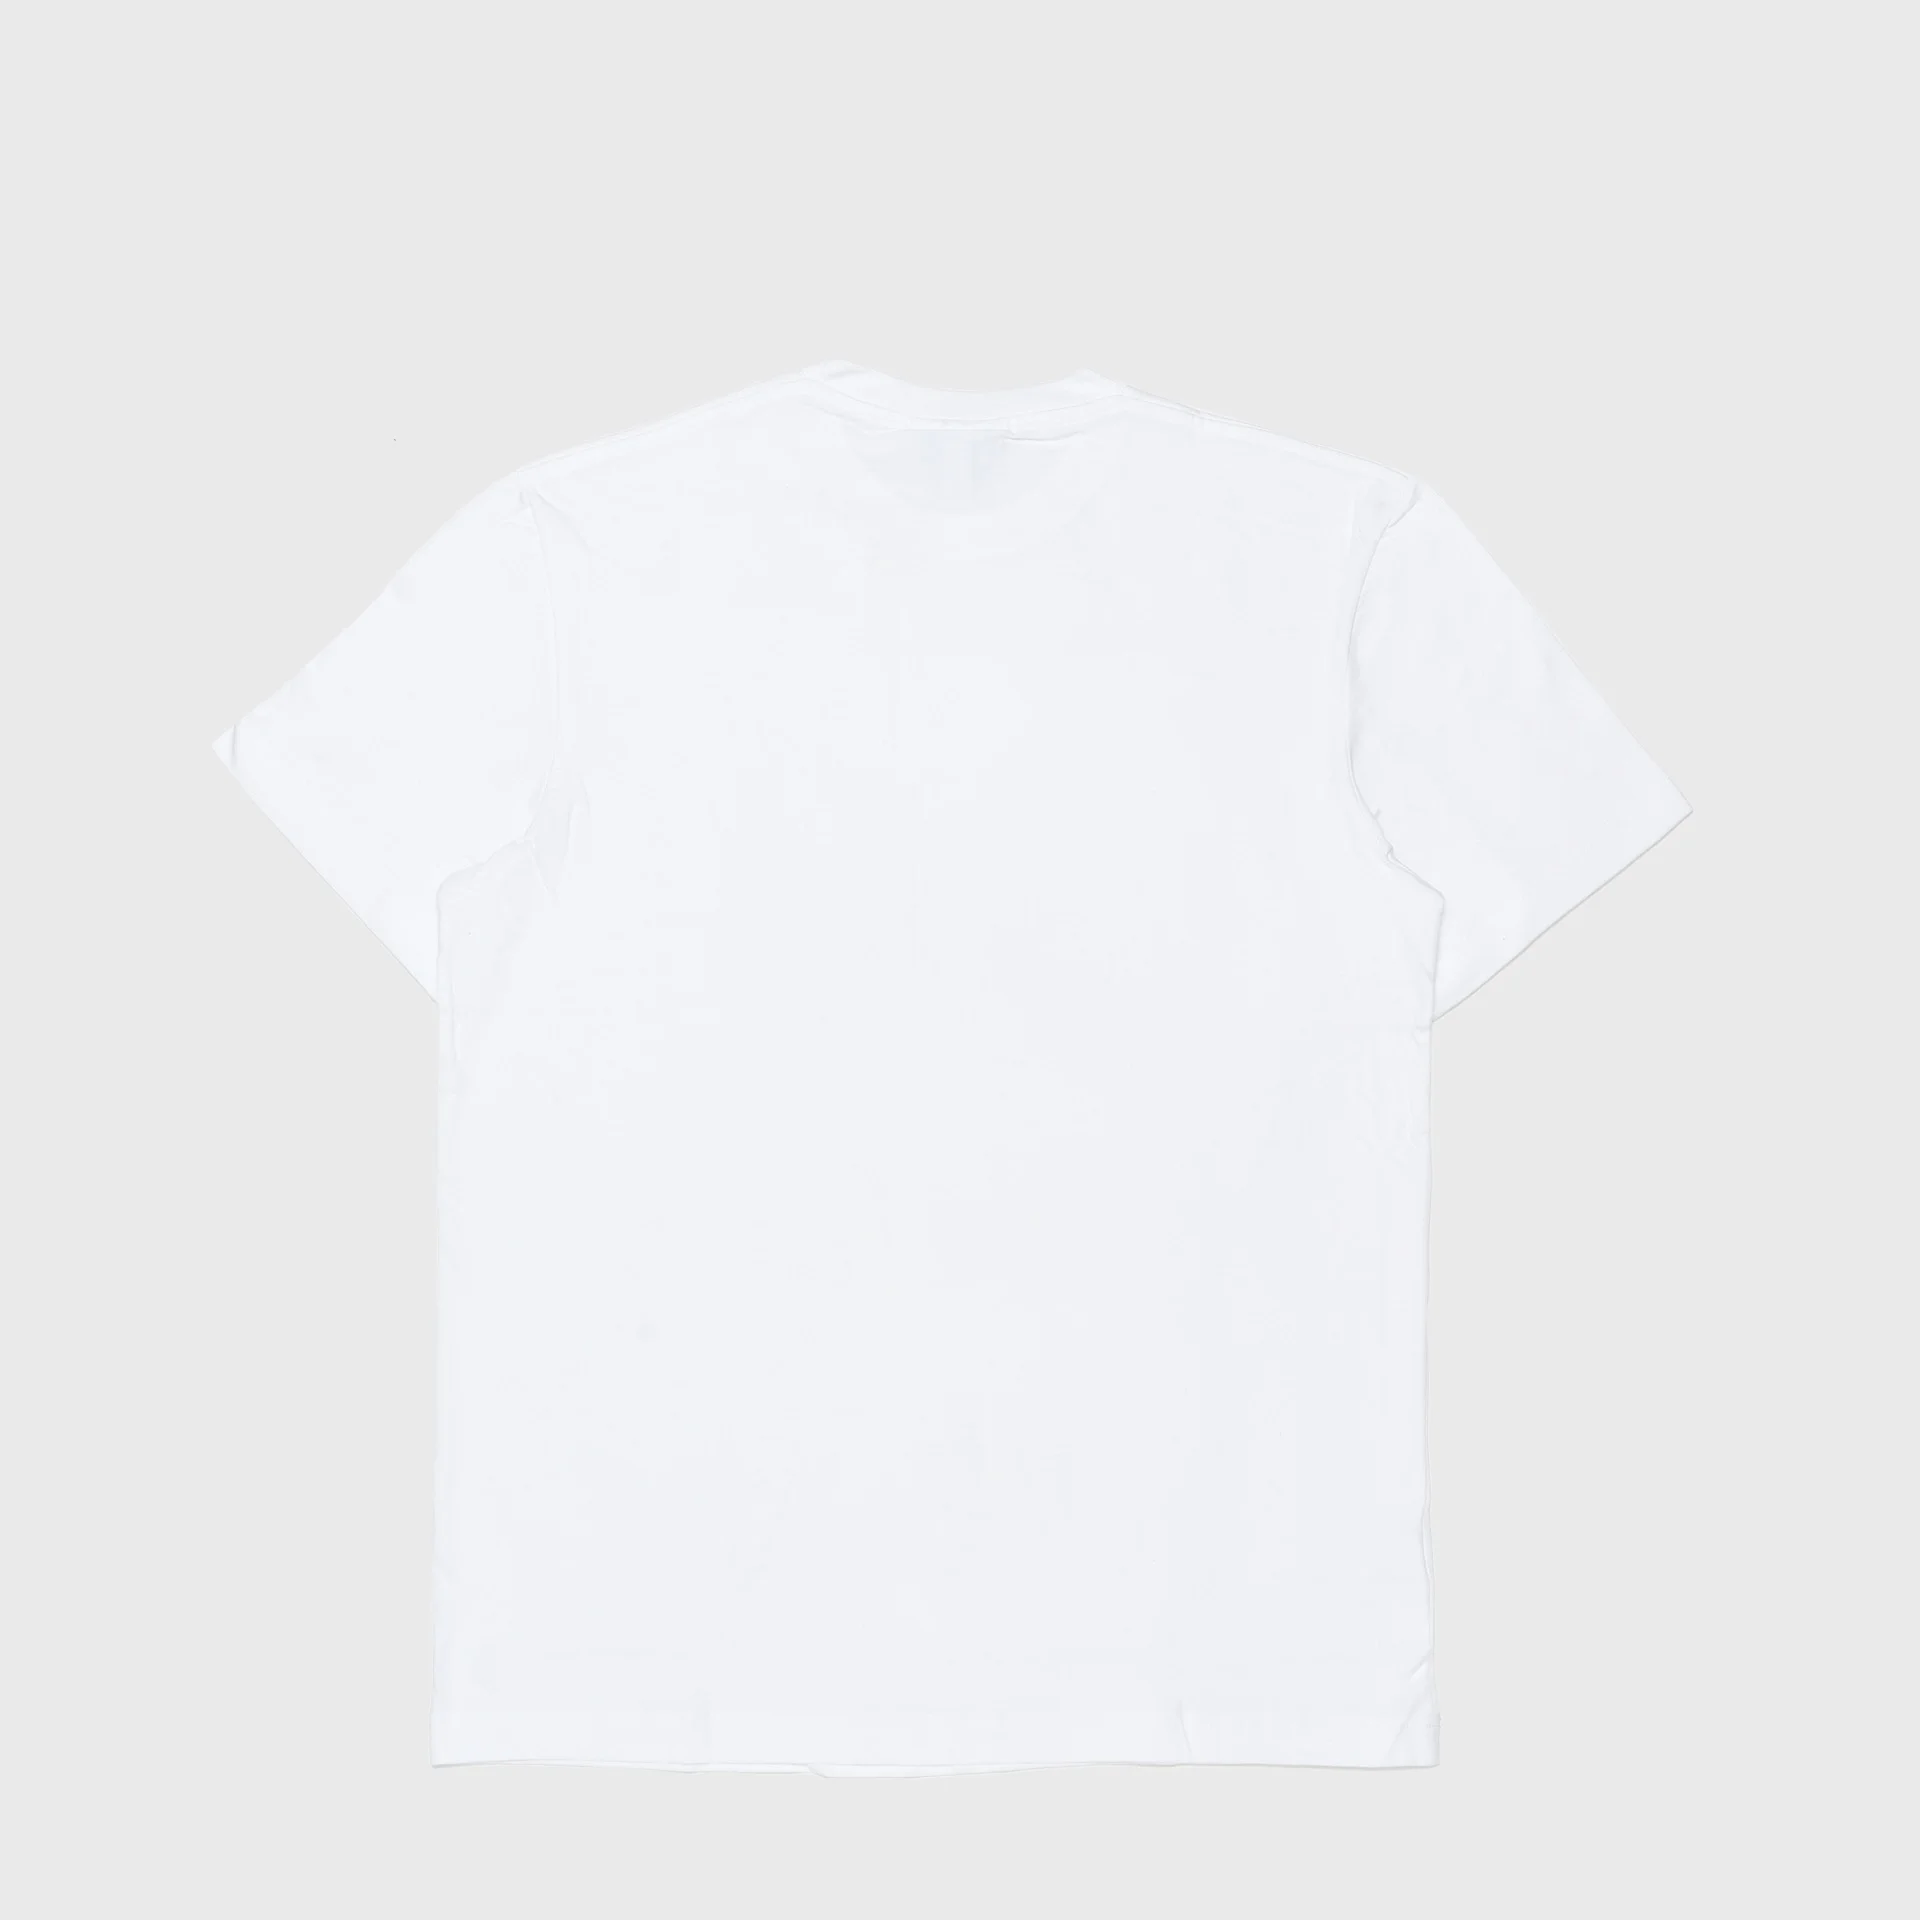 Lacoste Graphic Print Jersey T-Shirt White